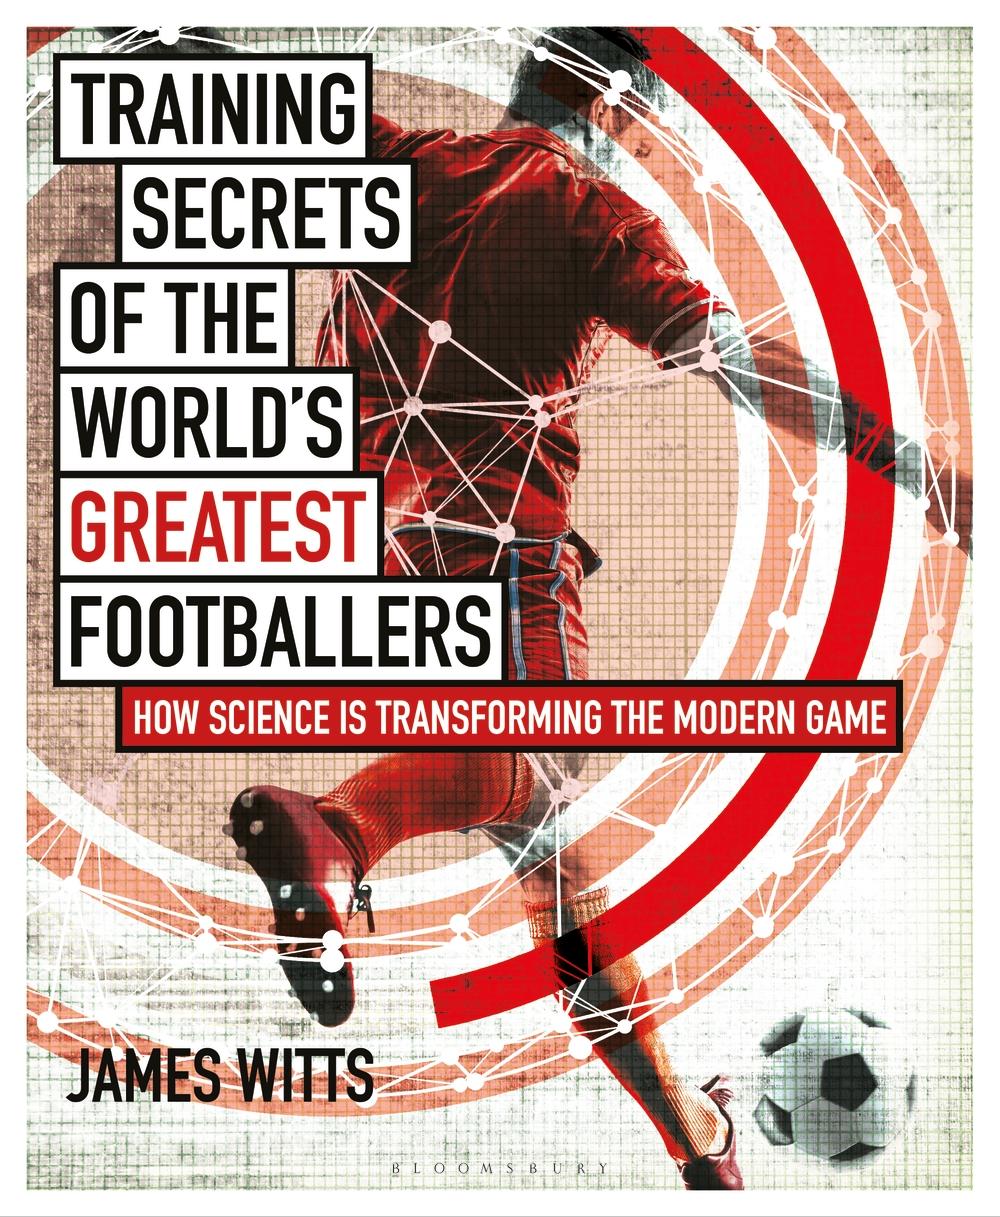 Training Secrets of the World's Greatest Footballers - James Witts